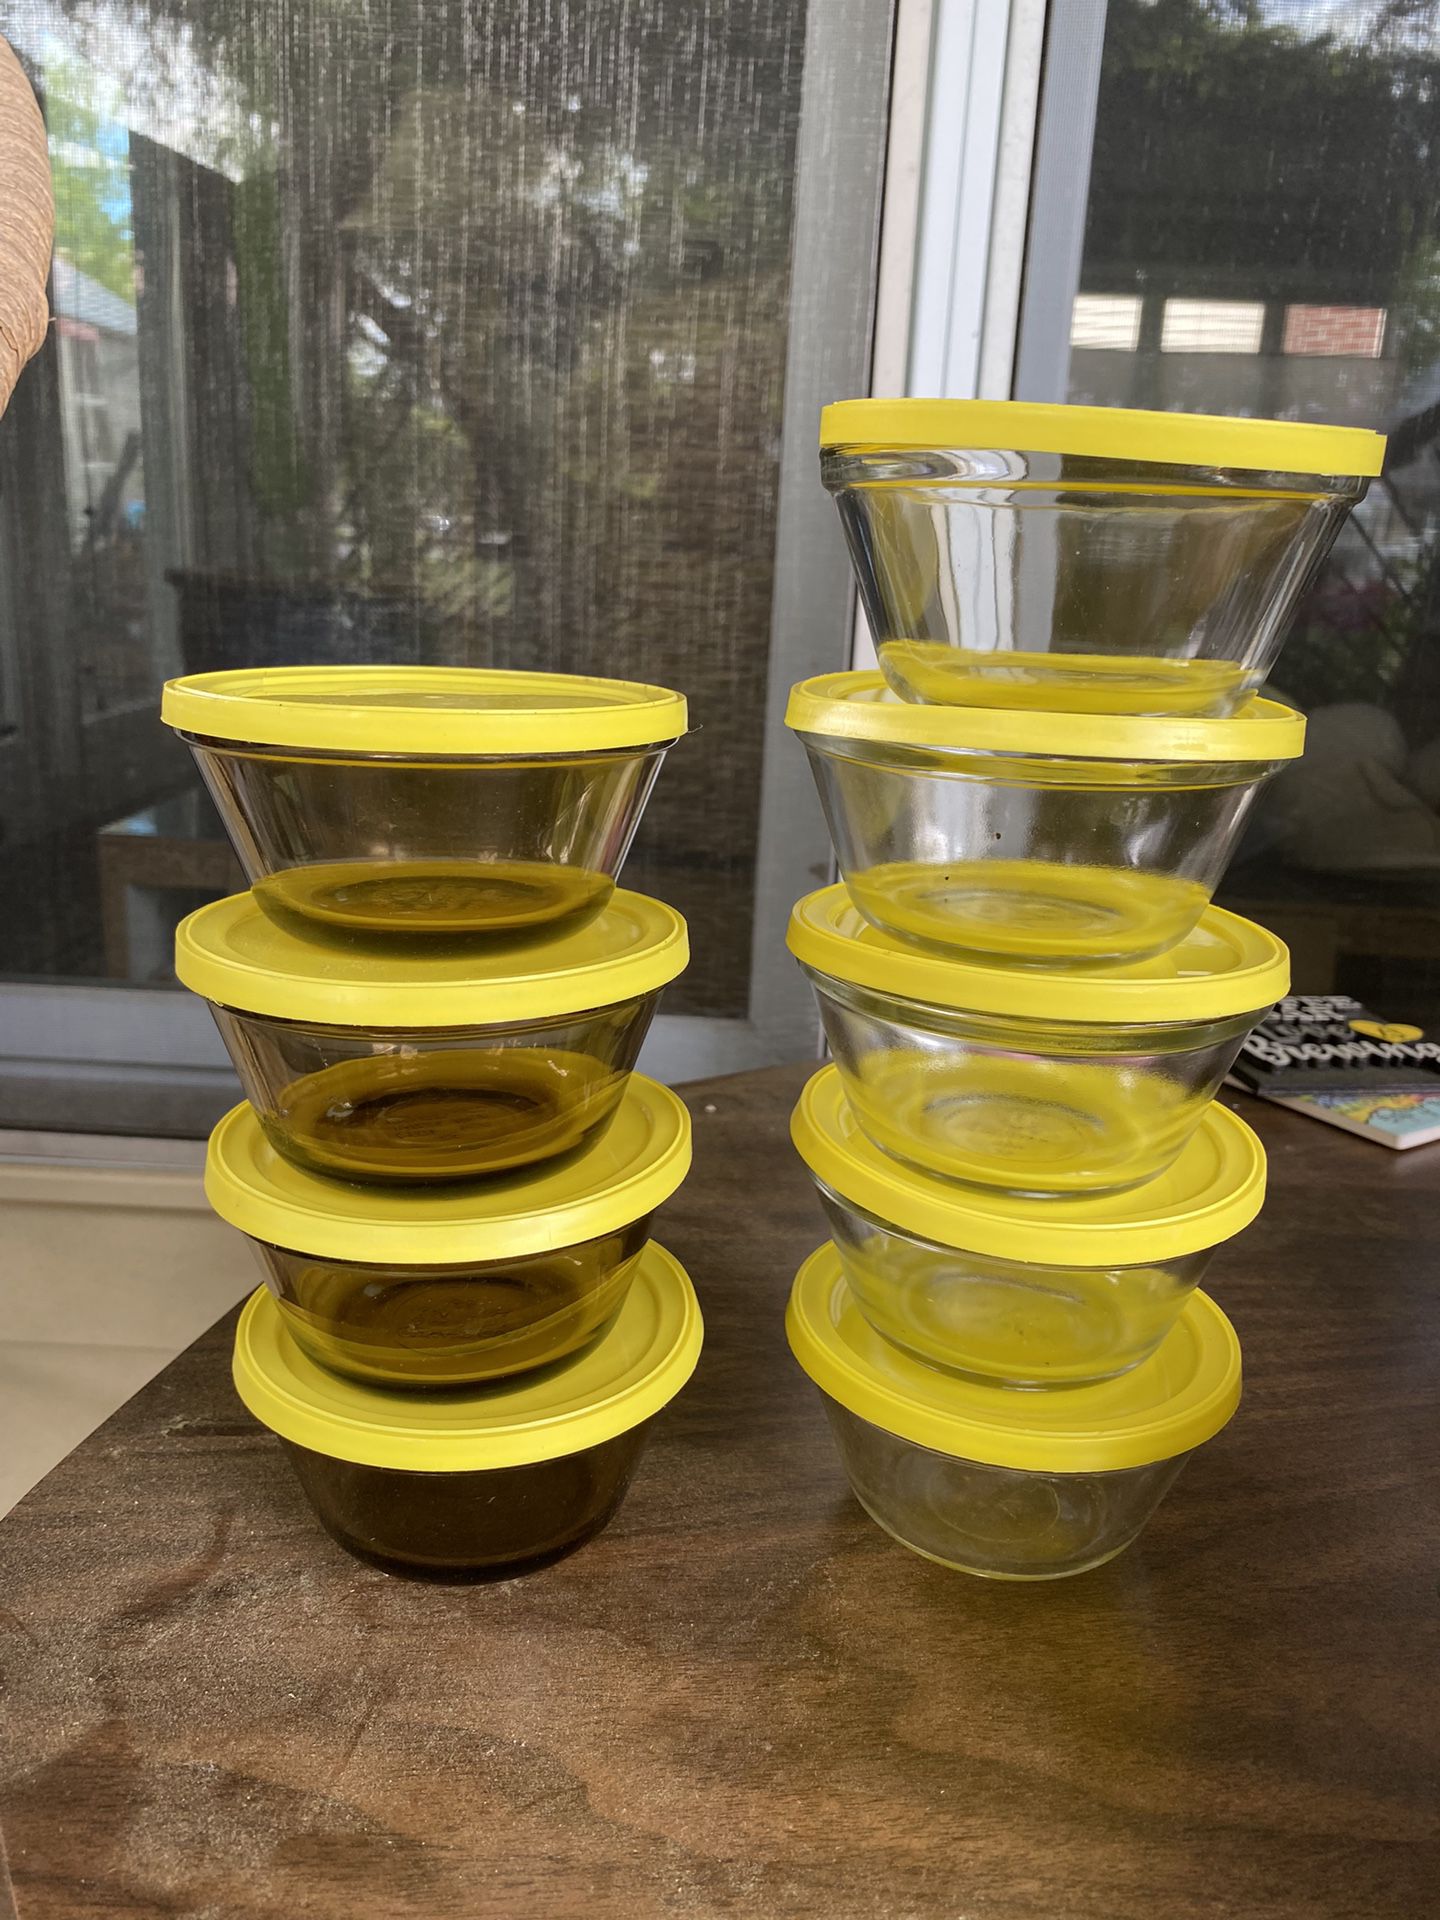 6 Oz - 9 Glass Bowls With Lids - All For $20